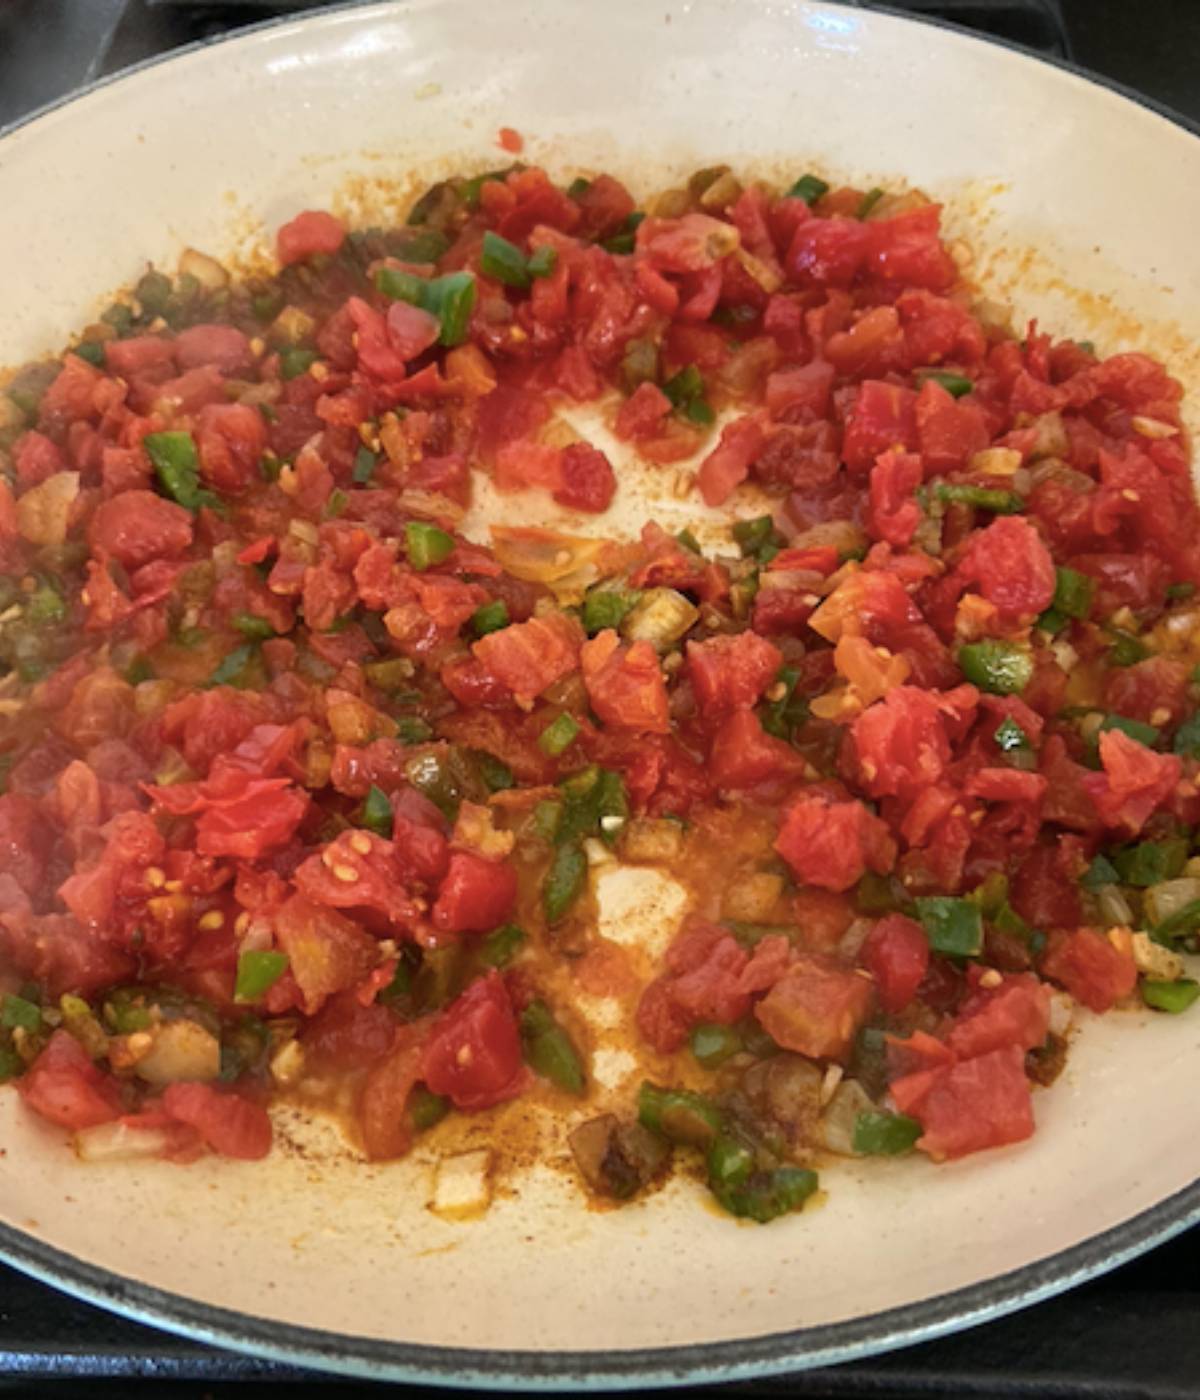 Rotel added into jalapeno dip.